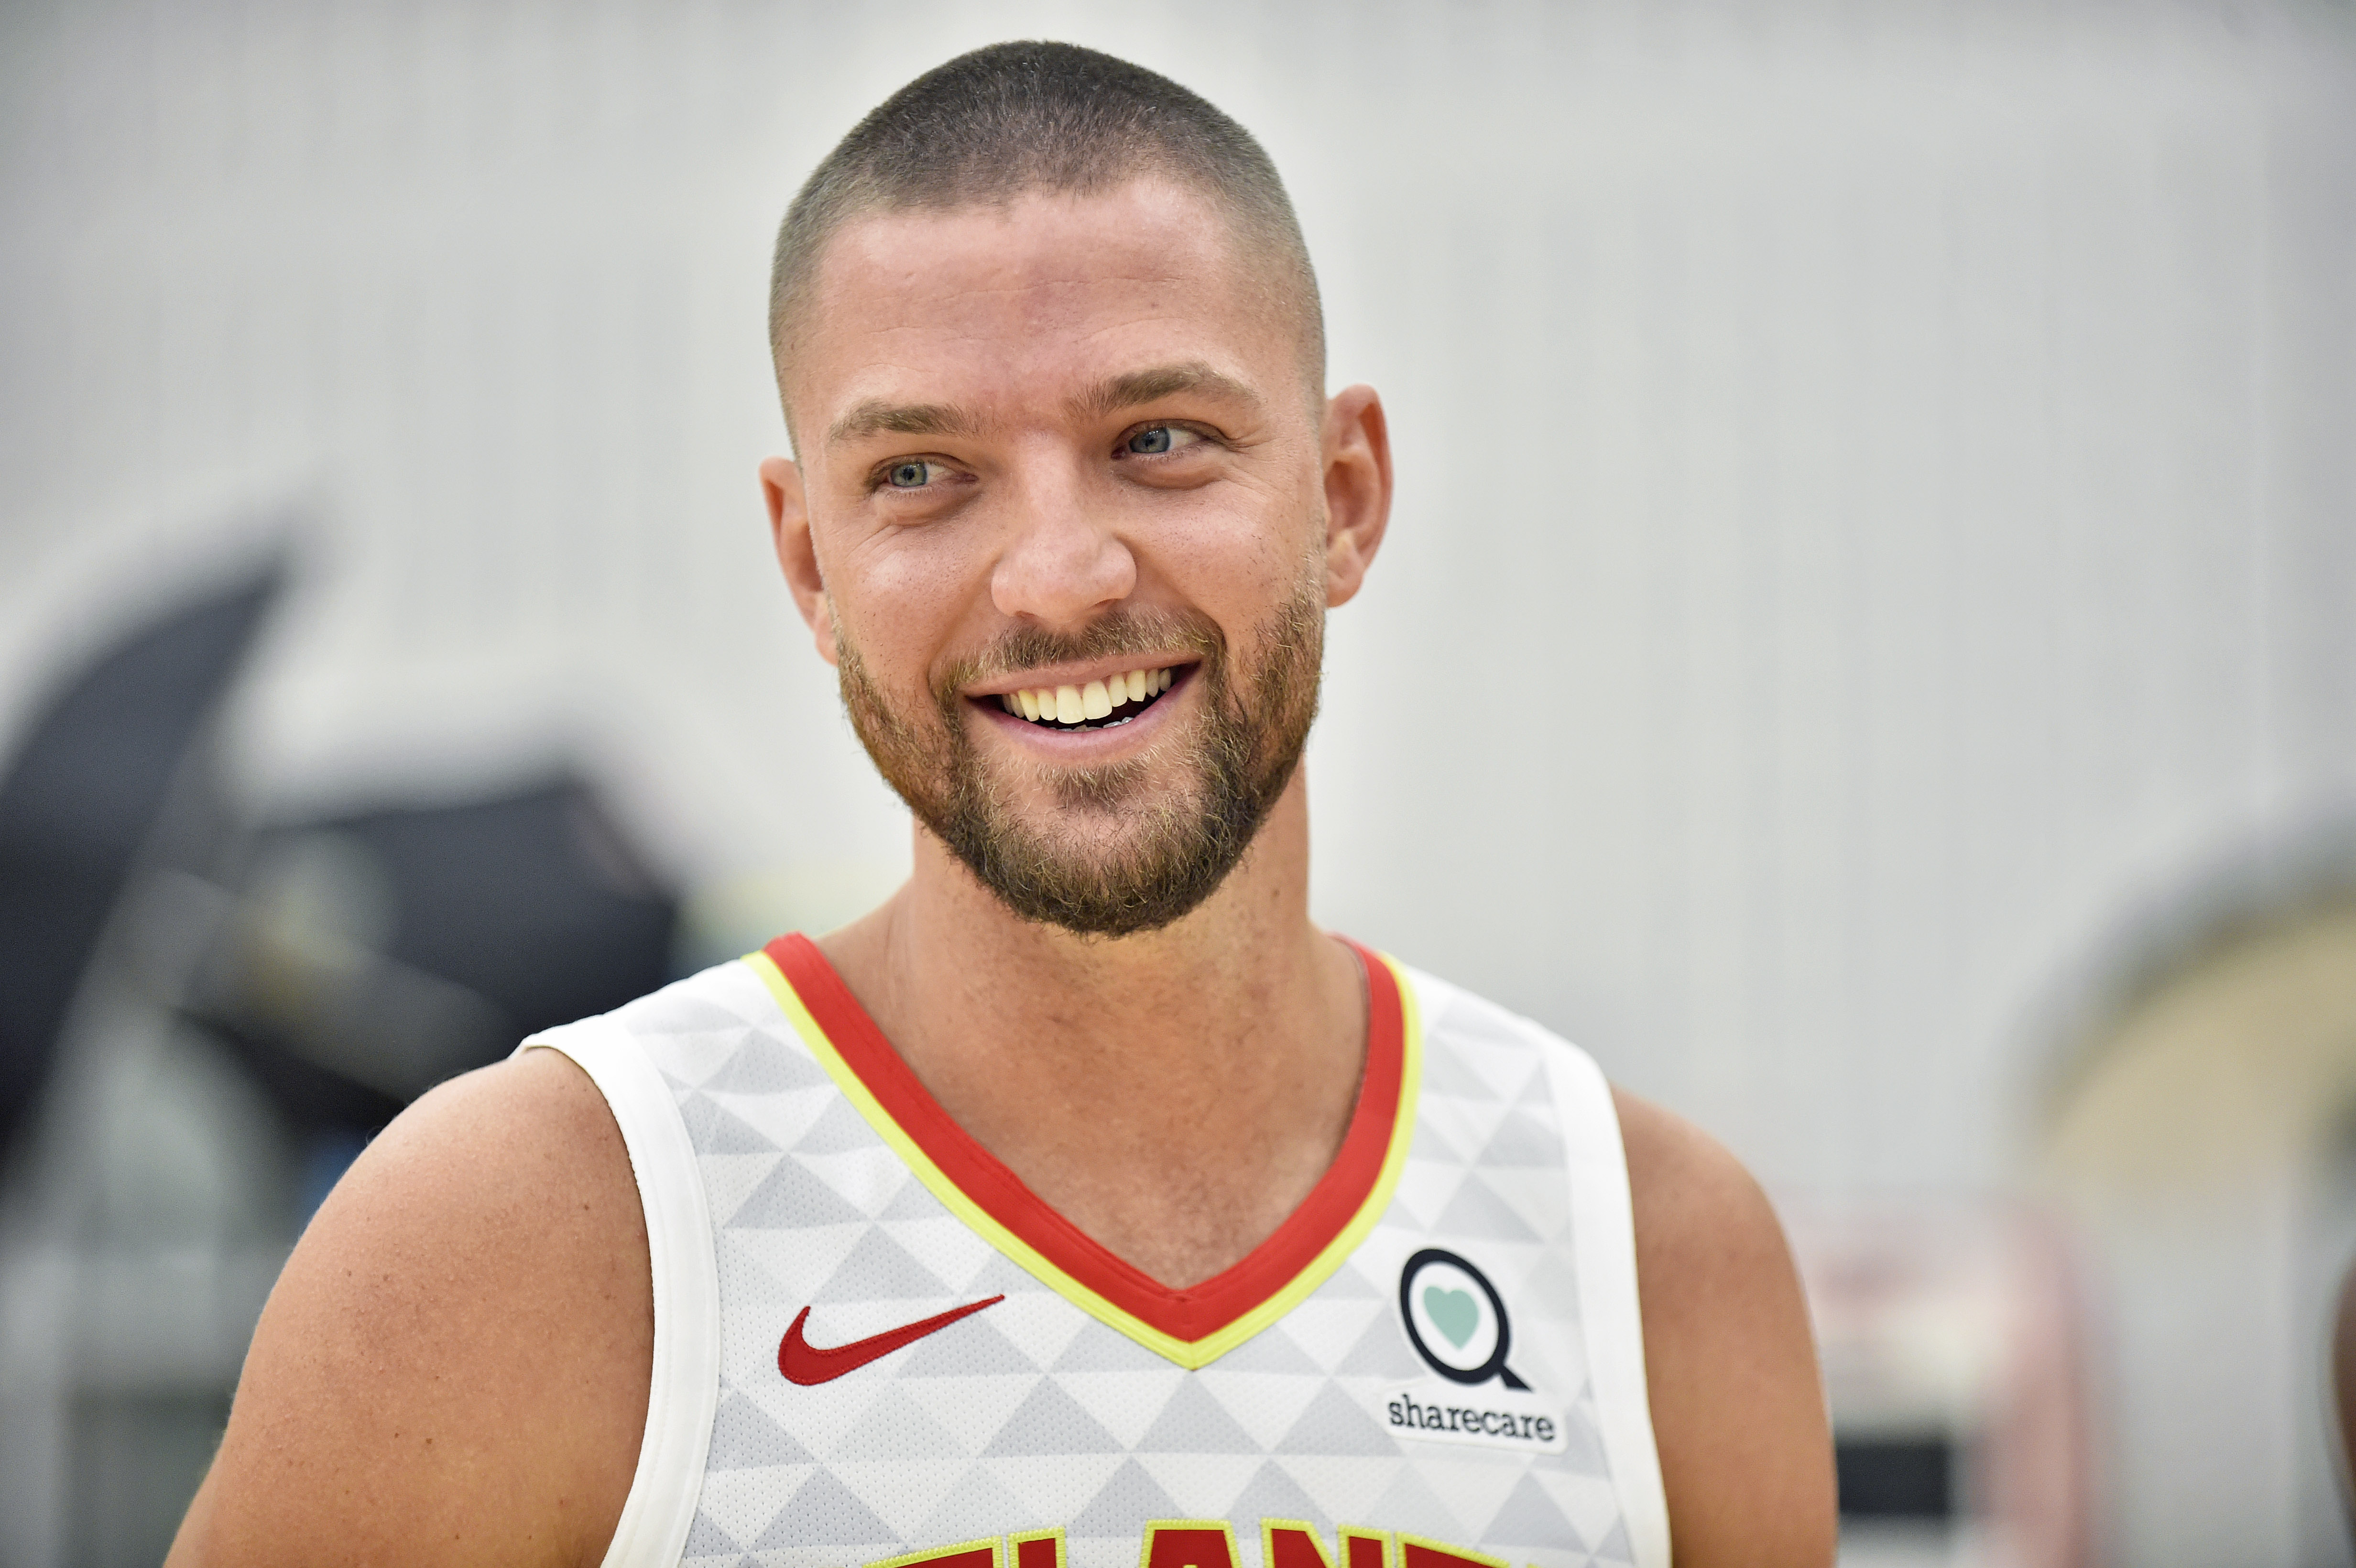 Hawks forward Chandler Parsons talks with reporters